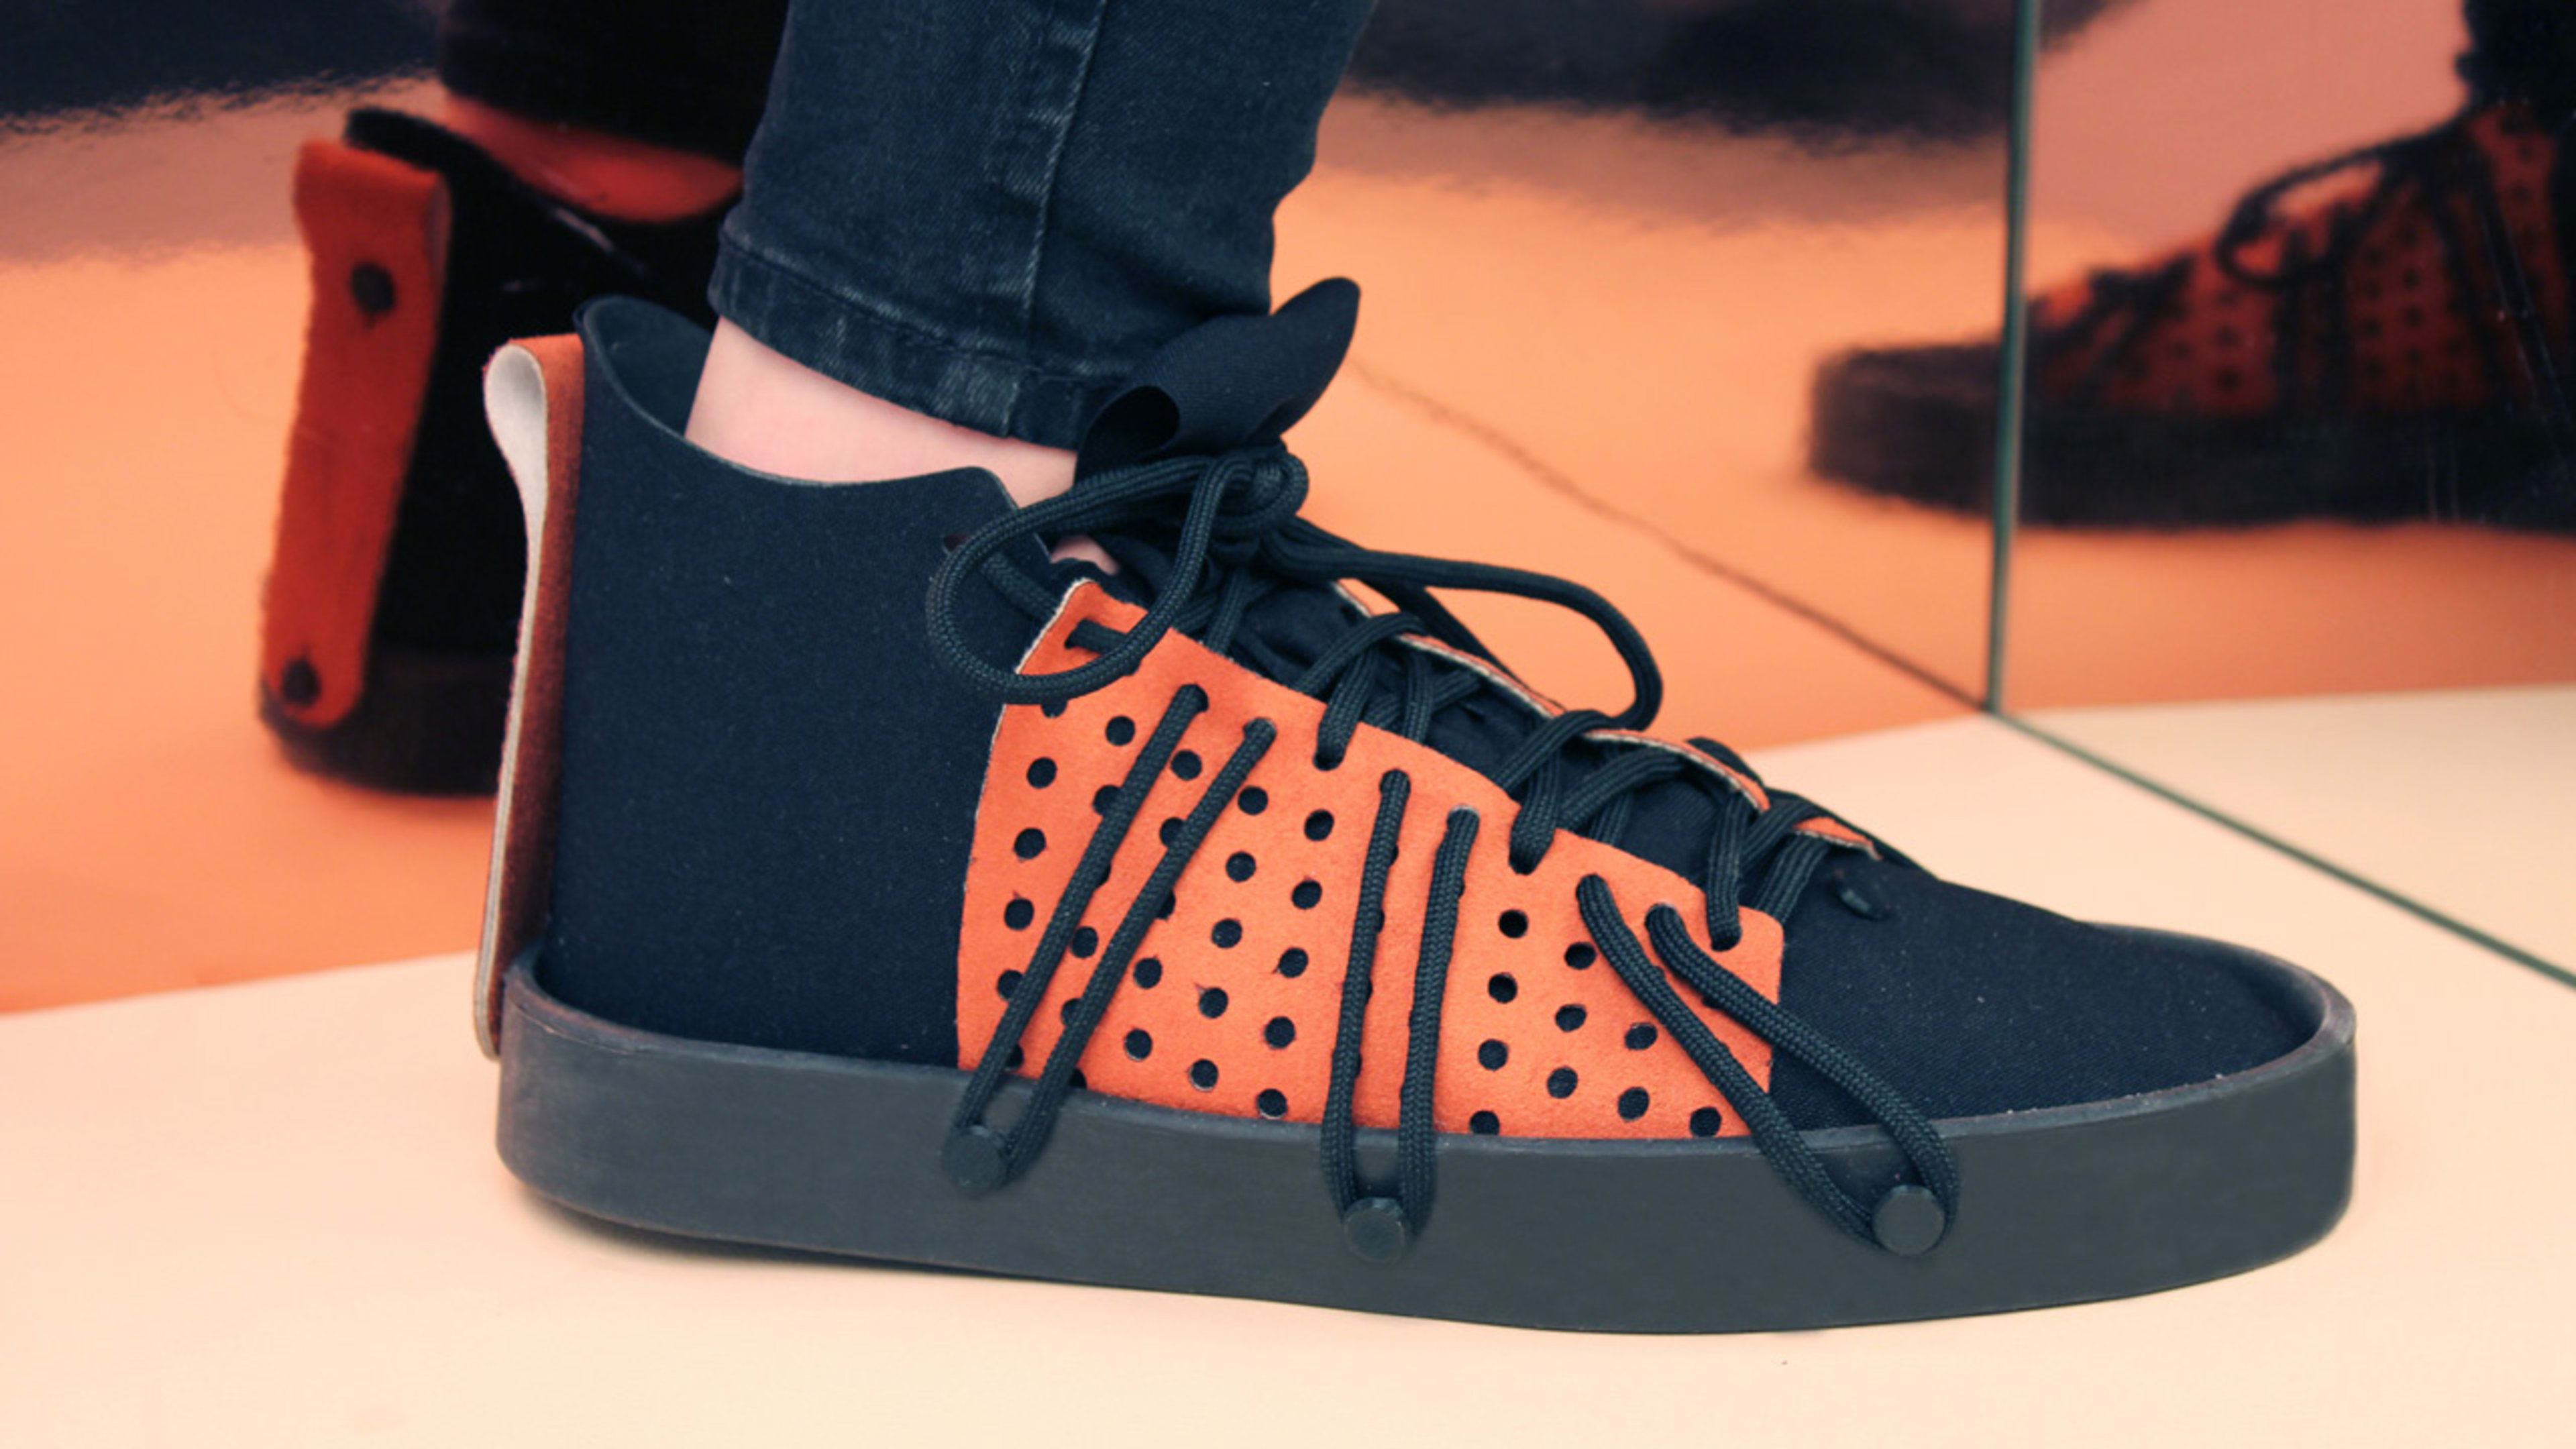 Could modular shoes be the next big sneaker craze?